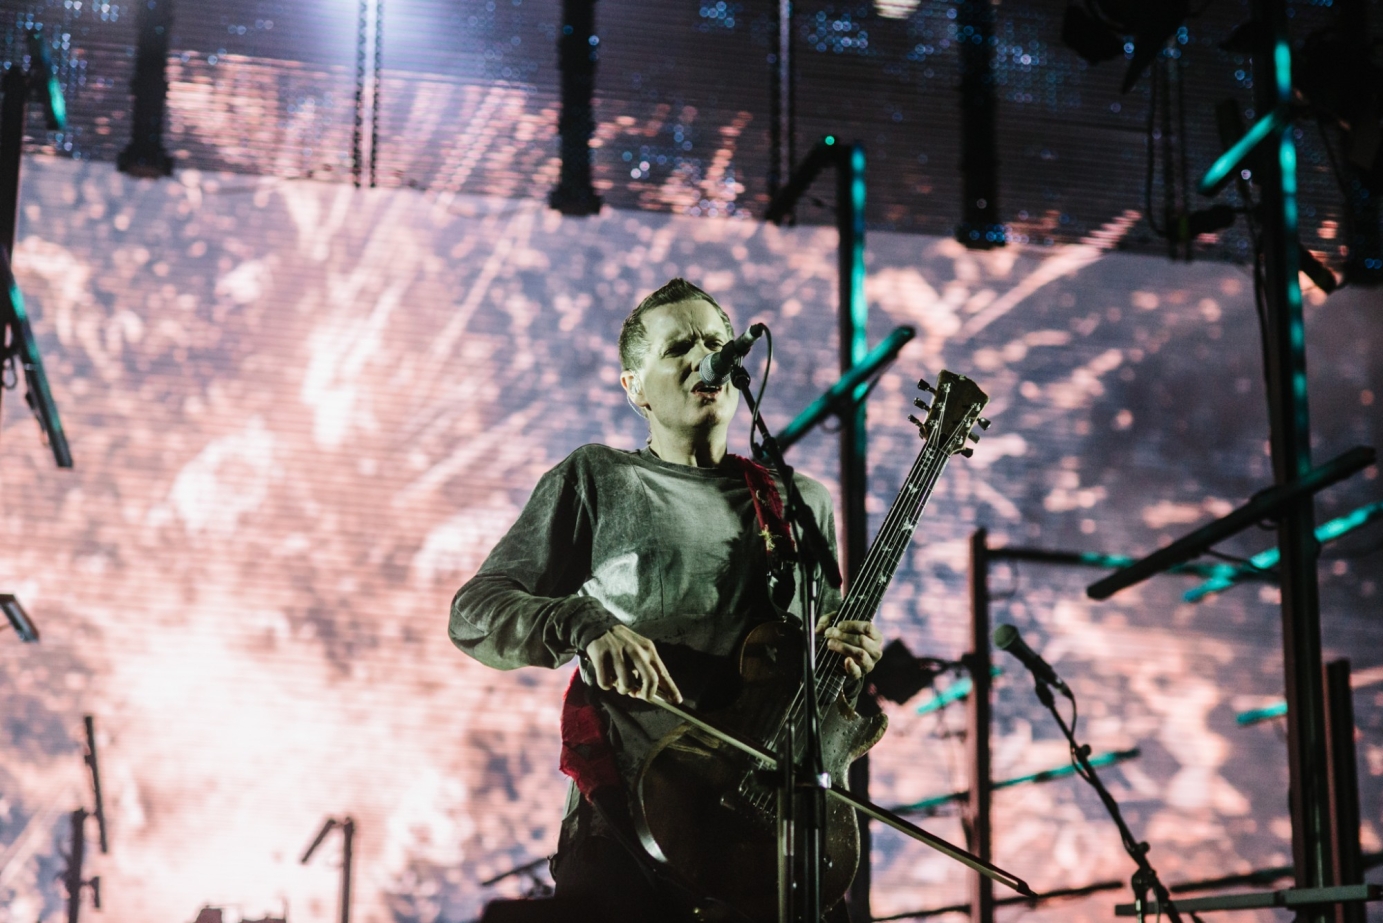 Photography for Sigur Ros by Andy Sawyer